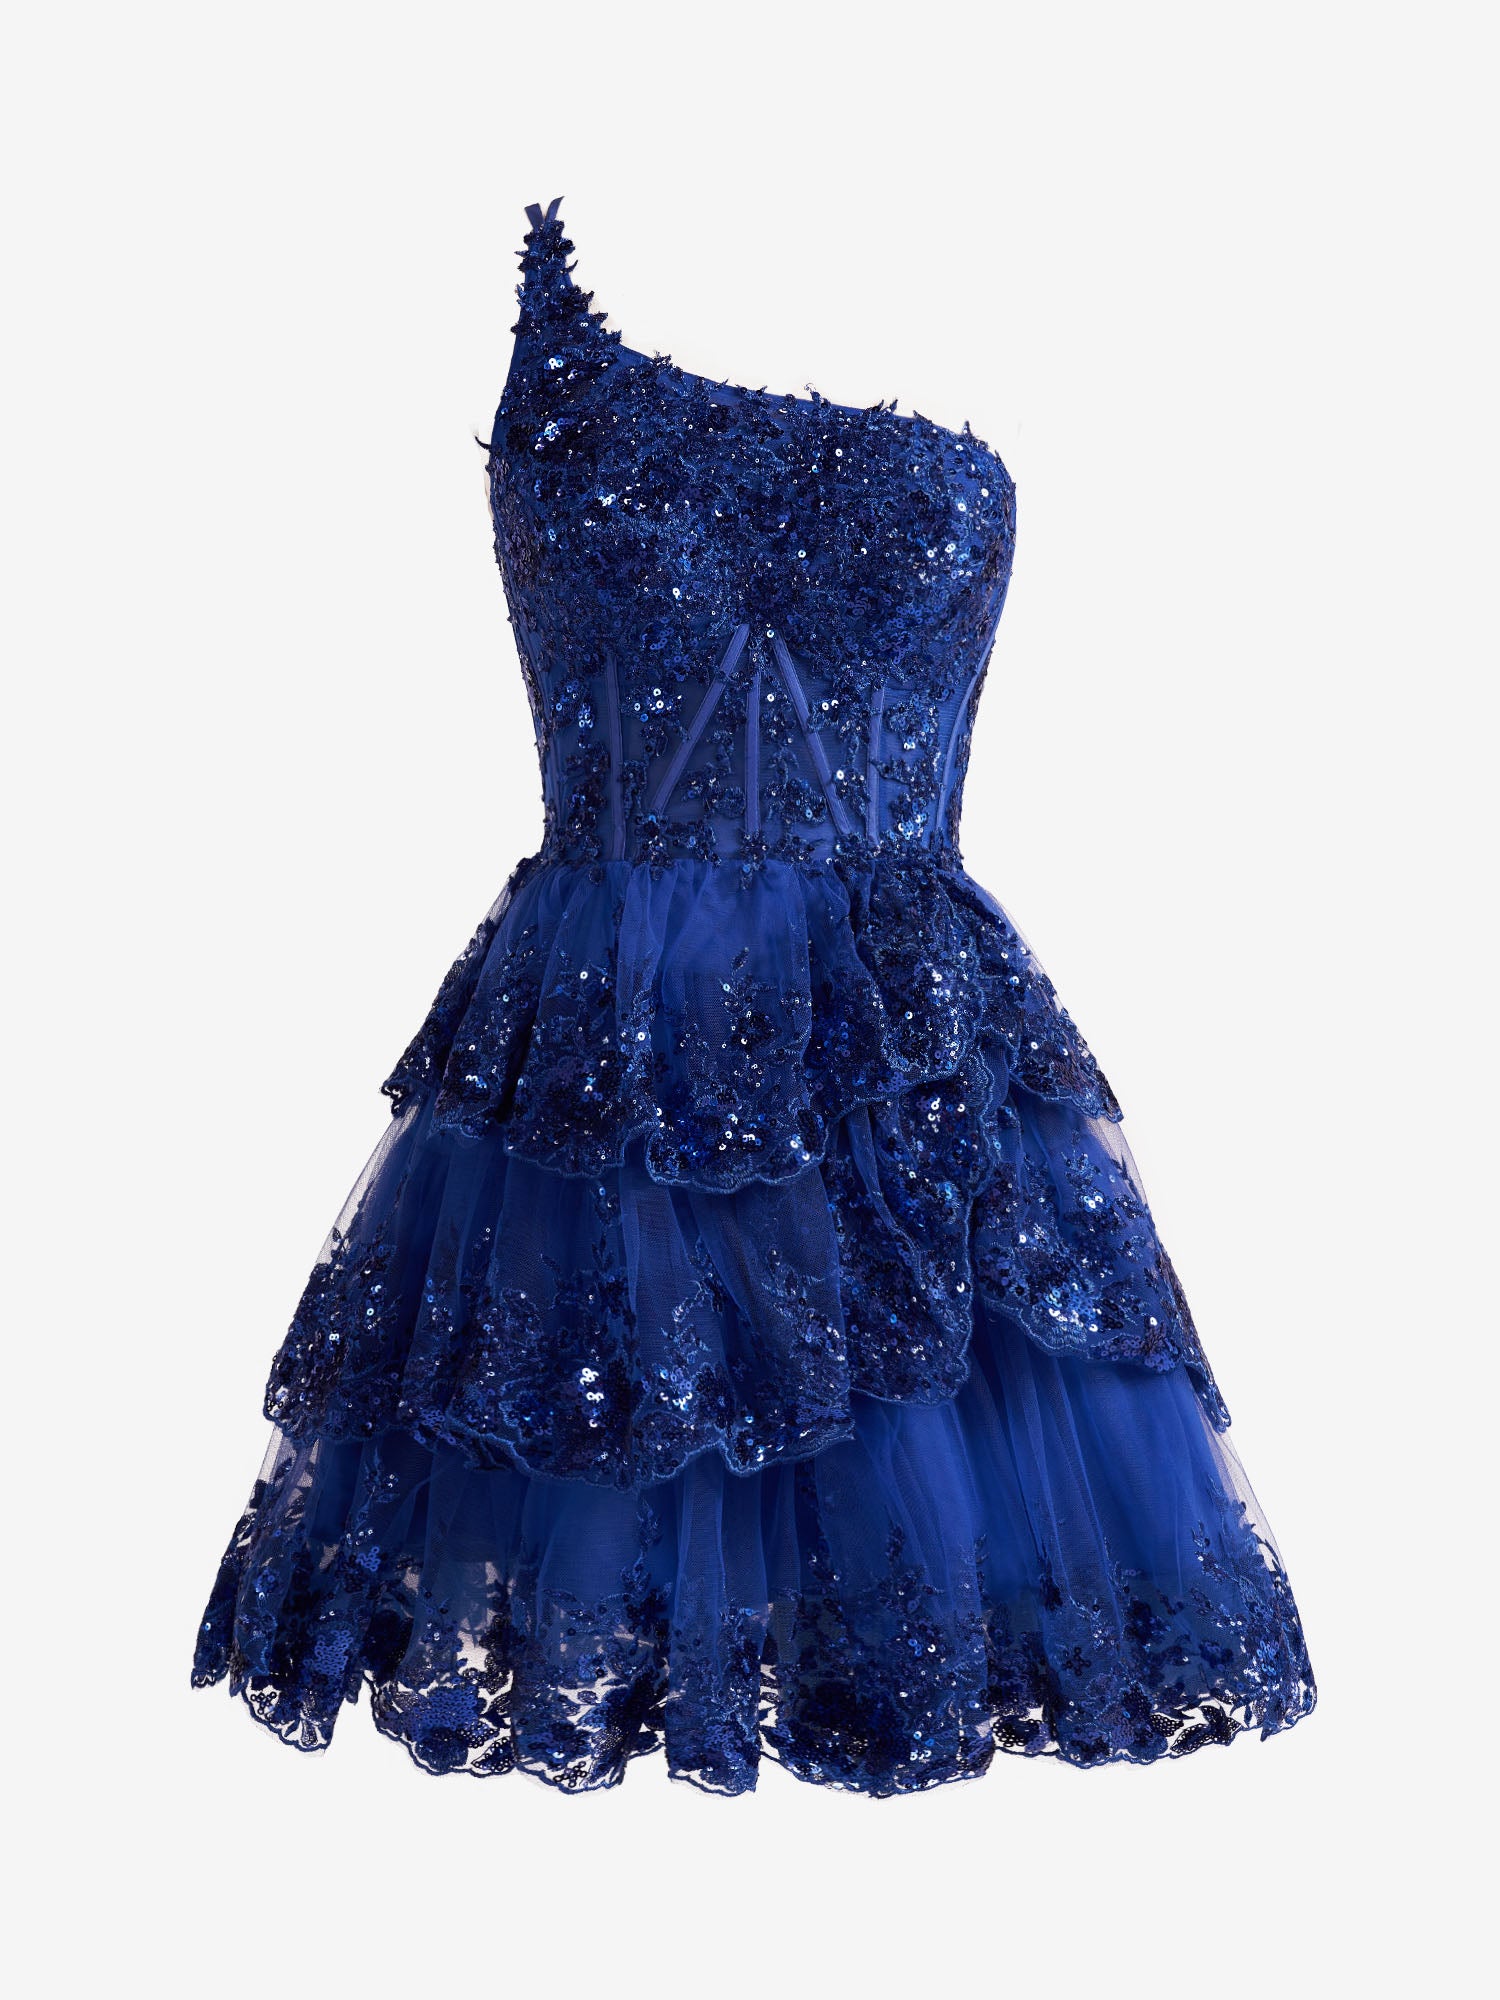 Emma | Royal Blue A Line One Shoulder Navy Tiered Lace Short Homecoming Dress